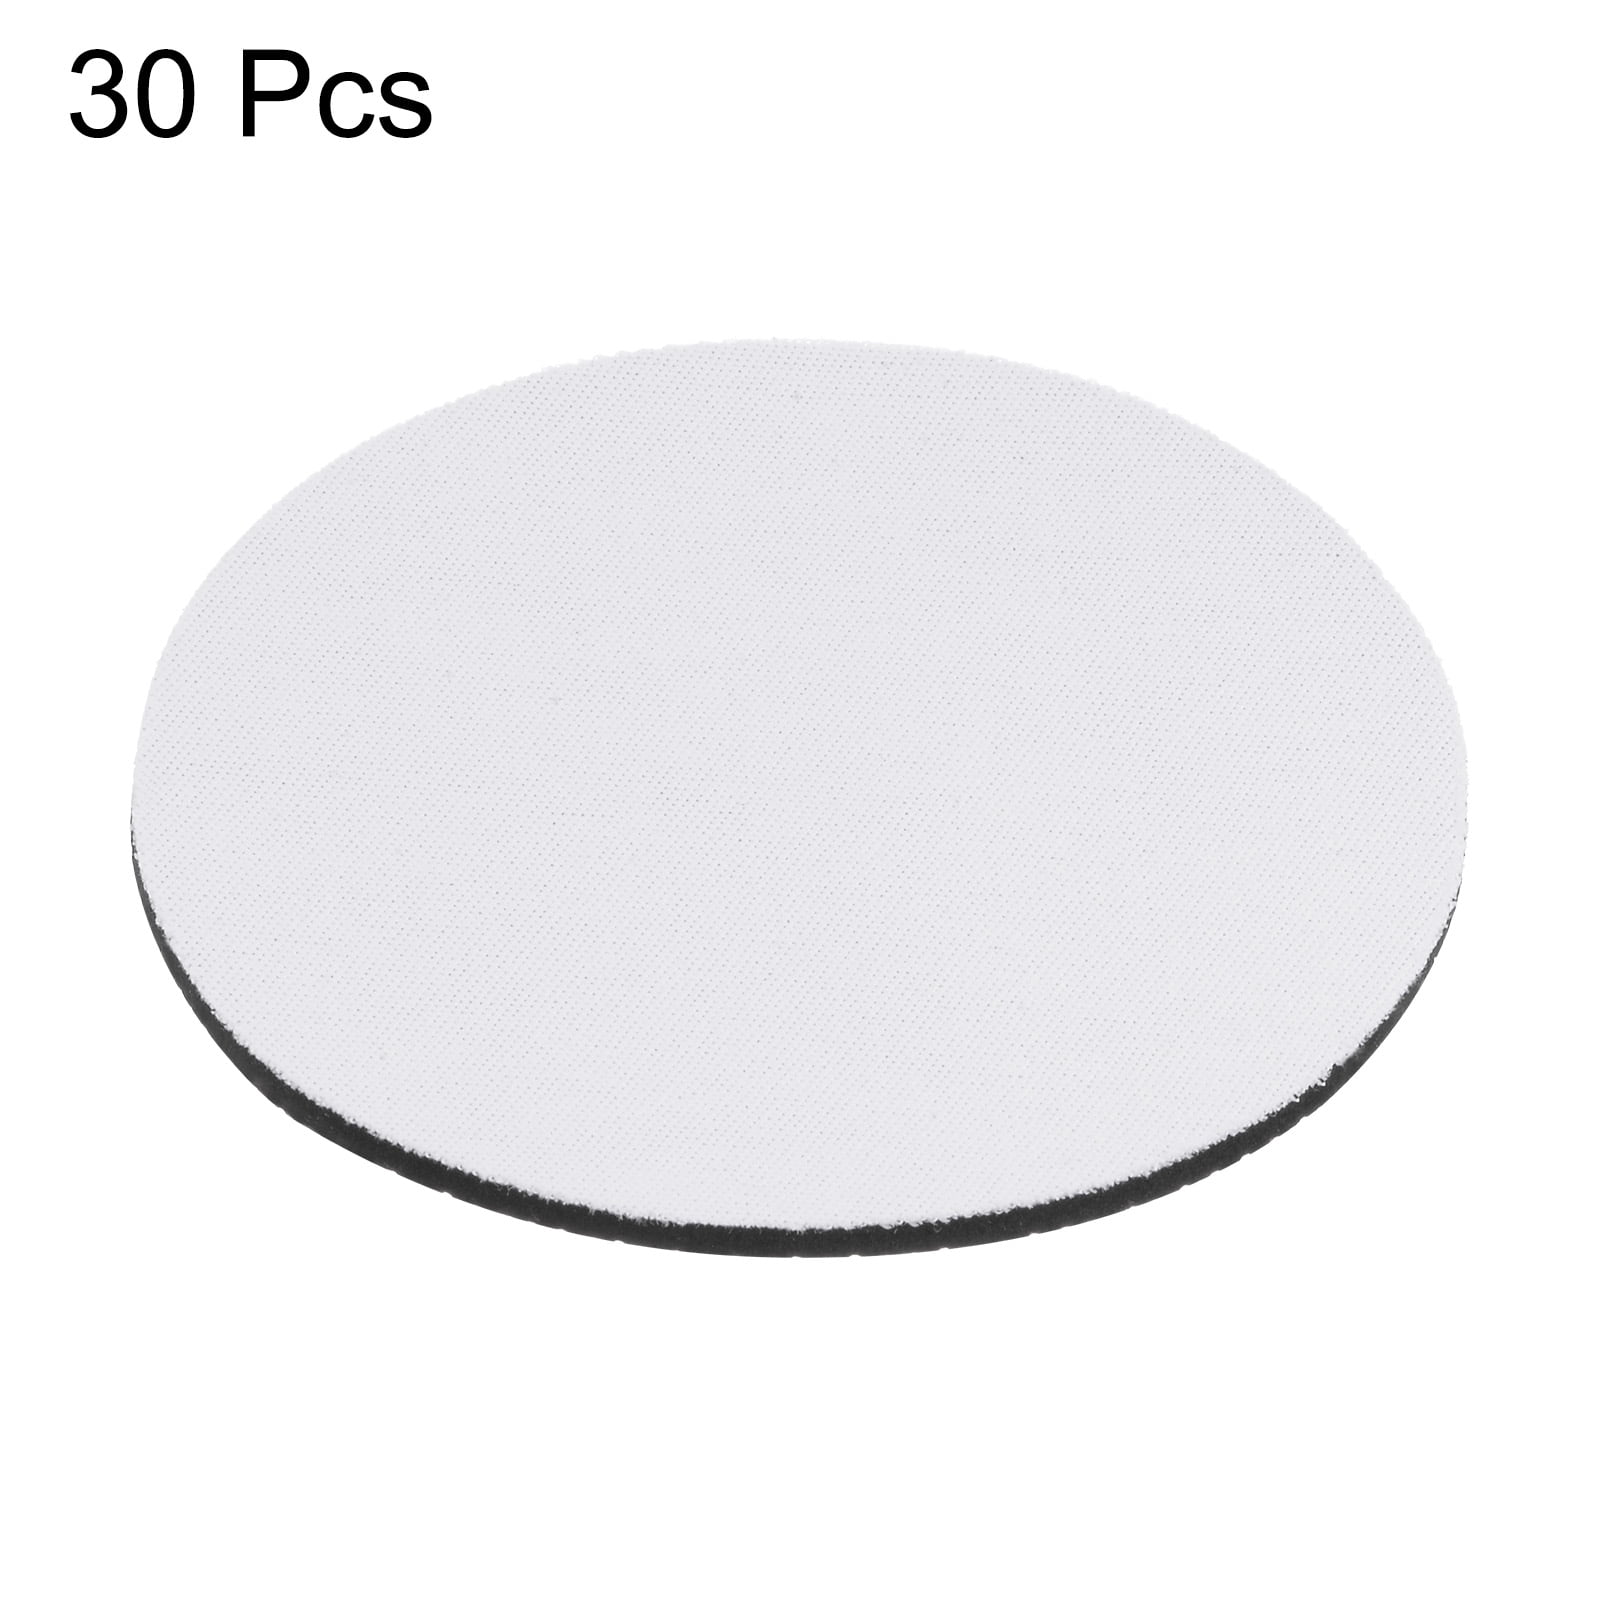 CALCA 120pcs Square Sublimation Blanks Tempered Glass Coasters